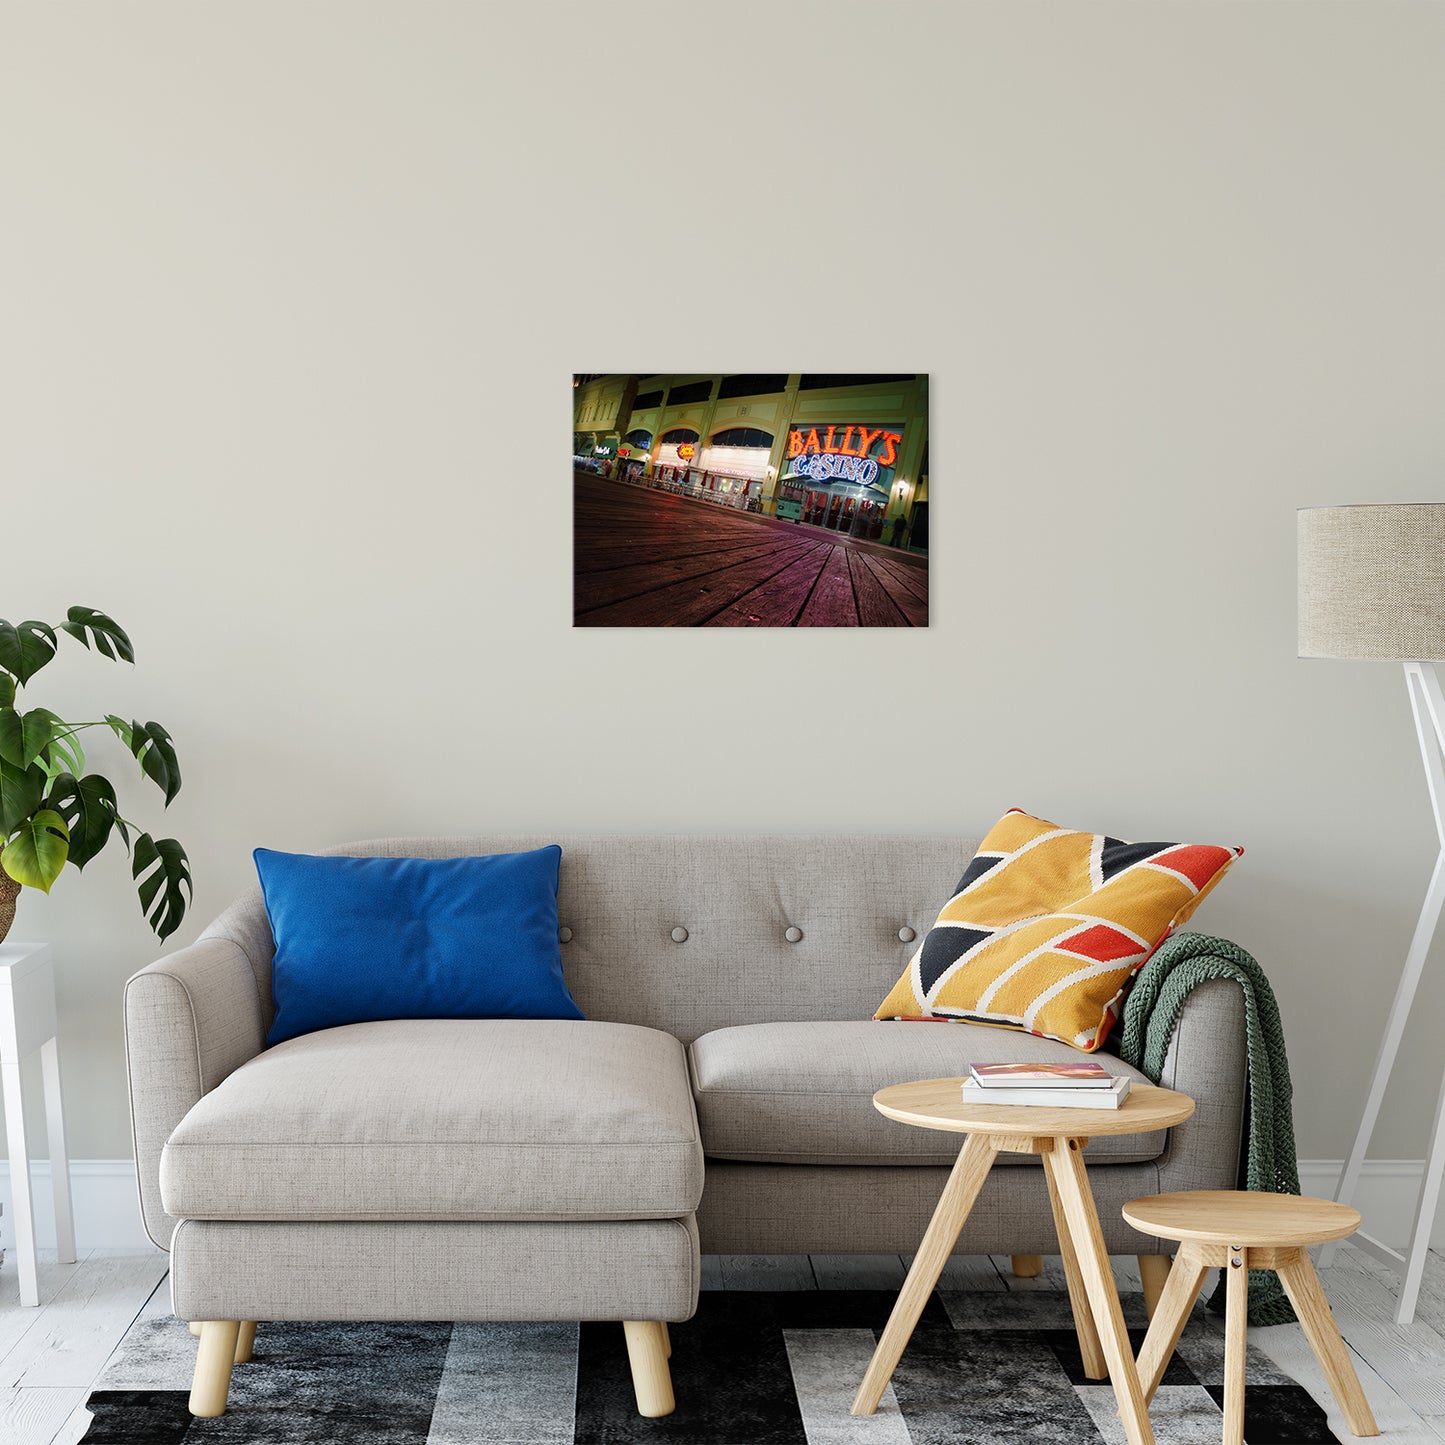 Low on the Boards Night Photo Fine Art Canvas Wall Art Prints 20" x 24" - PIPAFINEART